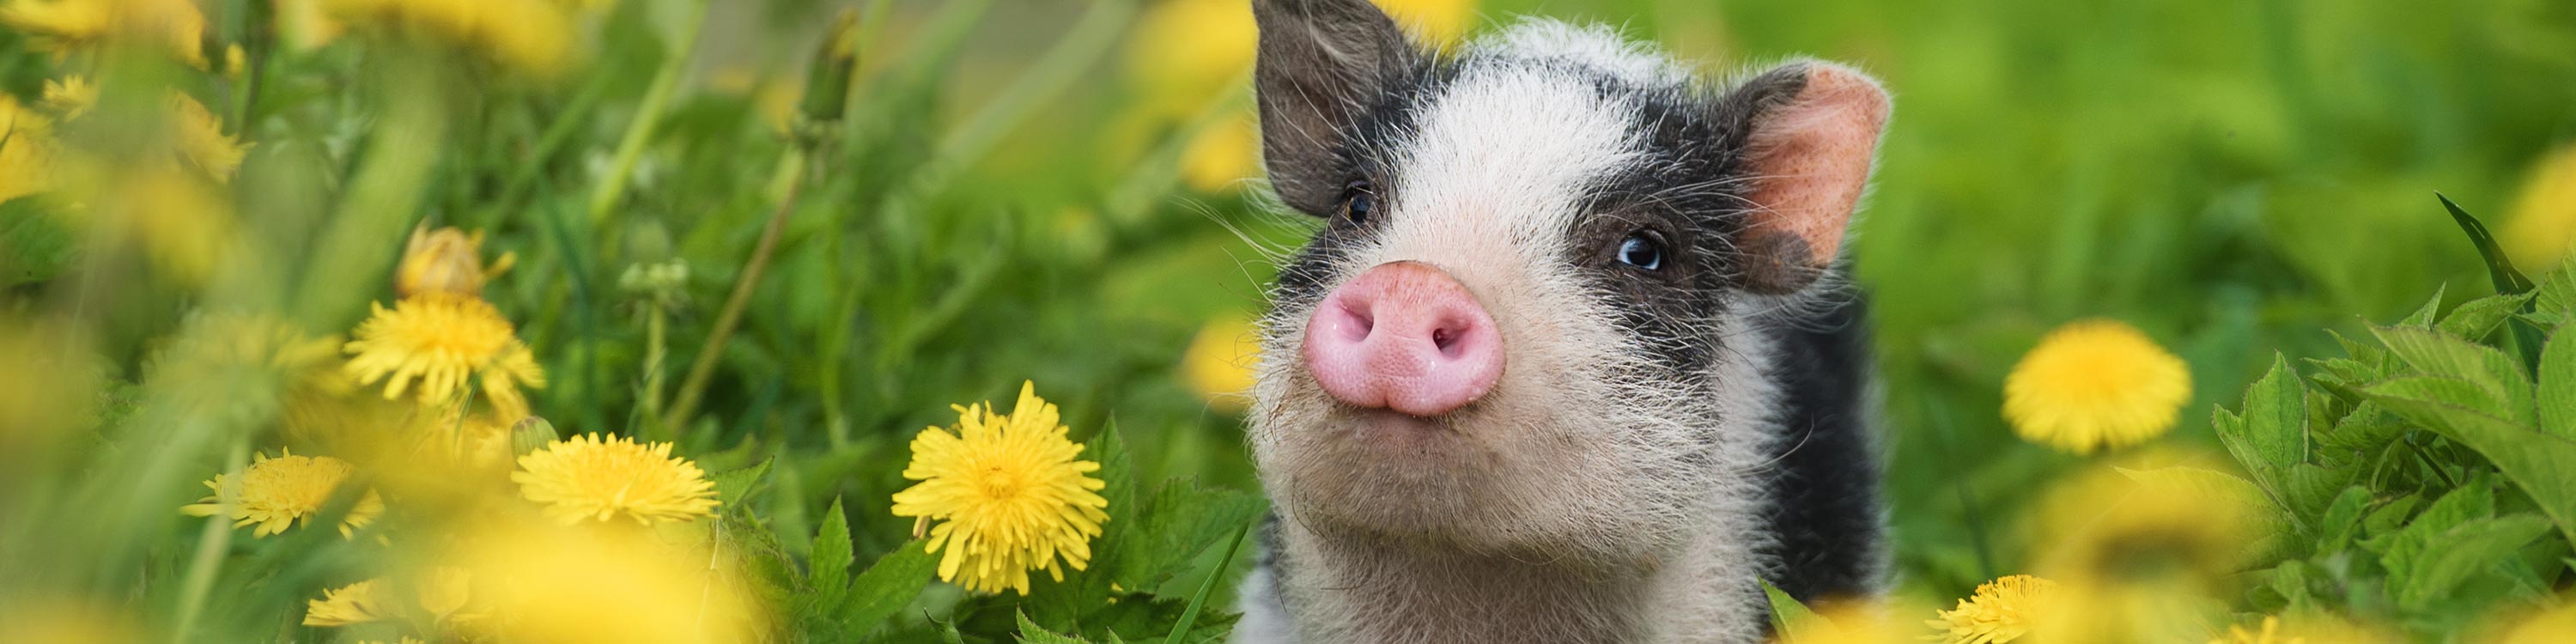 spotted pig in a field of dandelions